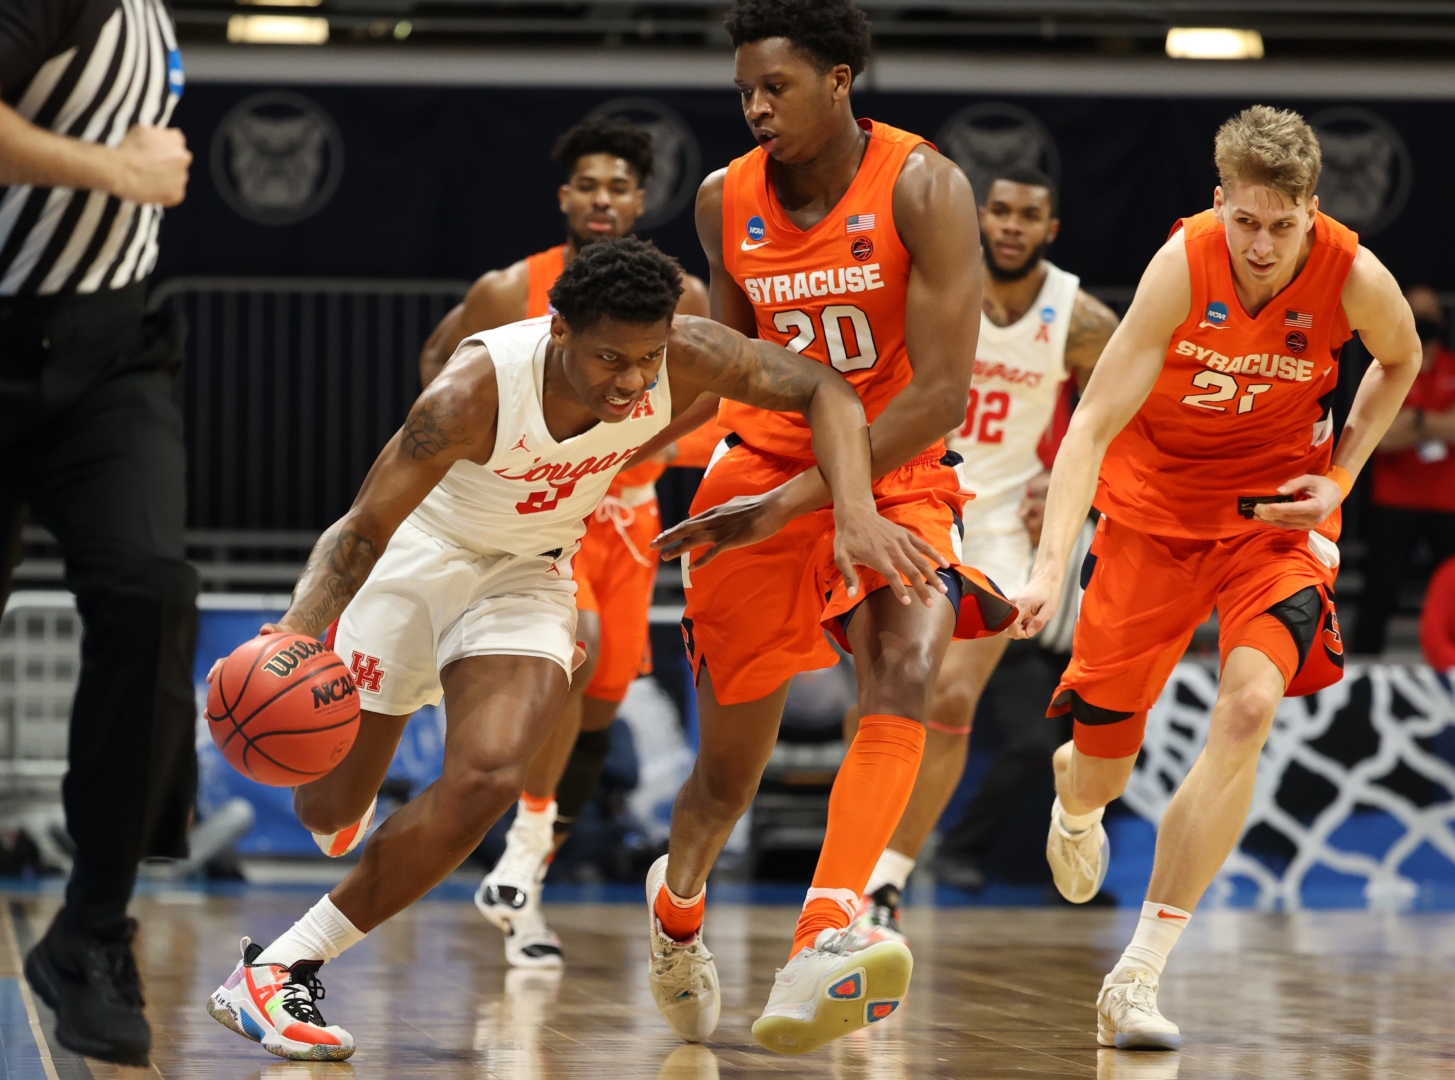 Syracuse plays UH in the Sweet Sixteen round of the 2021 NCAA Division I Men's Basketball Tournament held at Hinkle Fieldhouse on March 27, 2021 in Indianapolis, Indiana. | Photo by Trevor Brown Jr/NCAA Photos via Getty Images